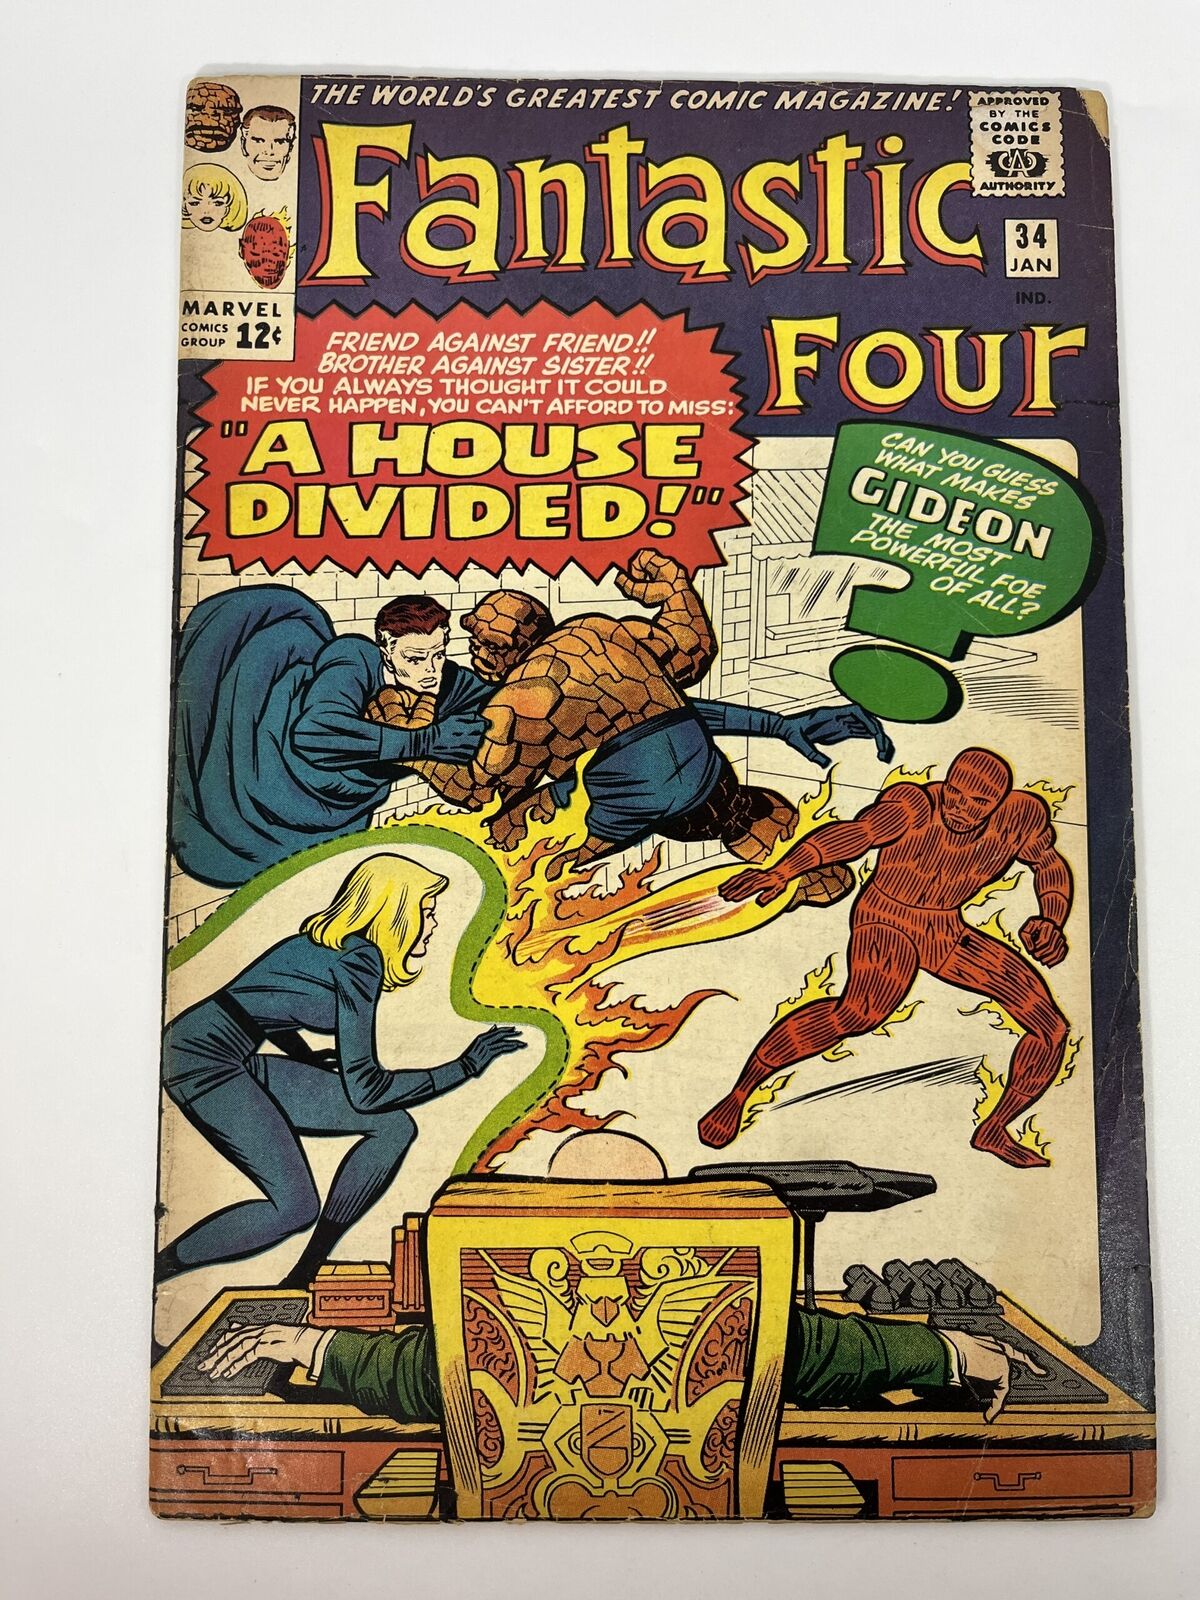 Fantastic Four #34 (1964) in 4.5 Very Good+